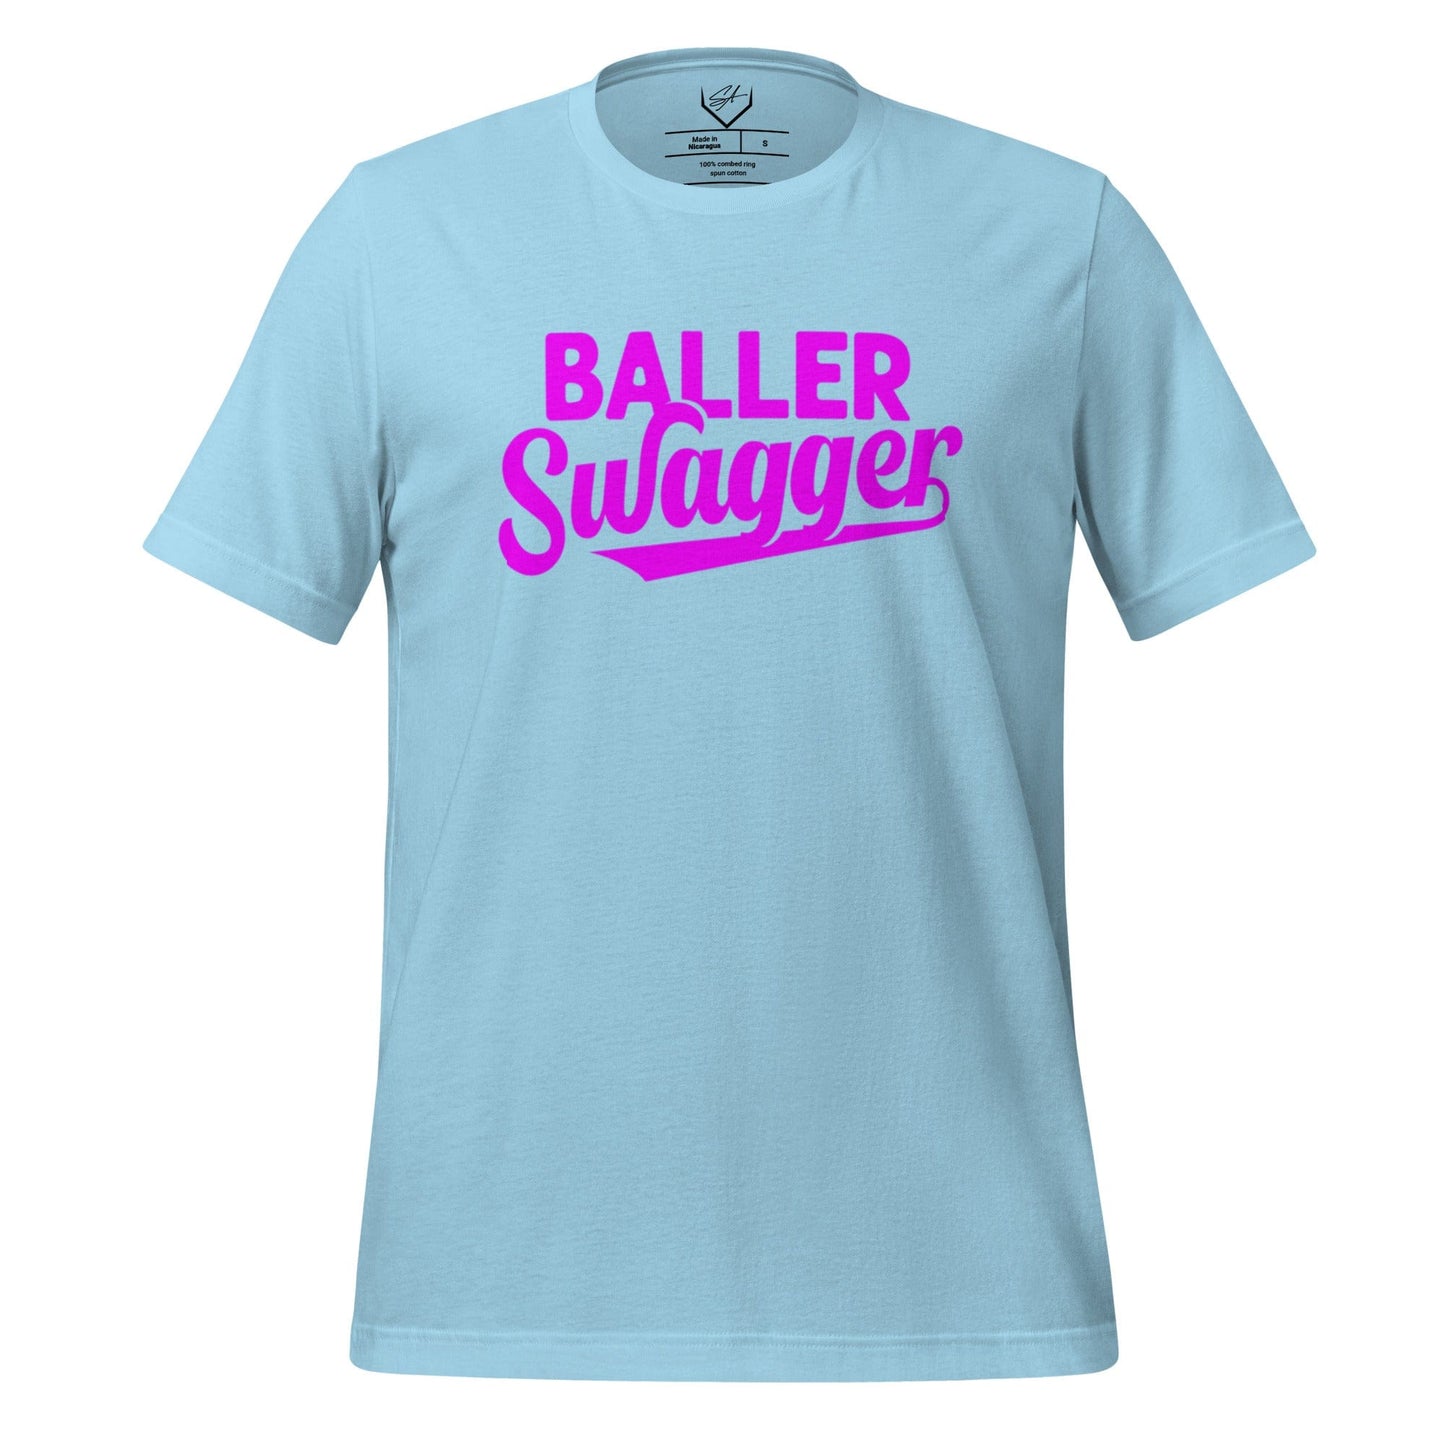 Baller Swagger Pink - Adult Tee